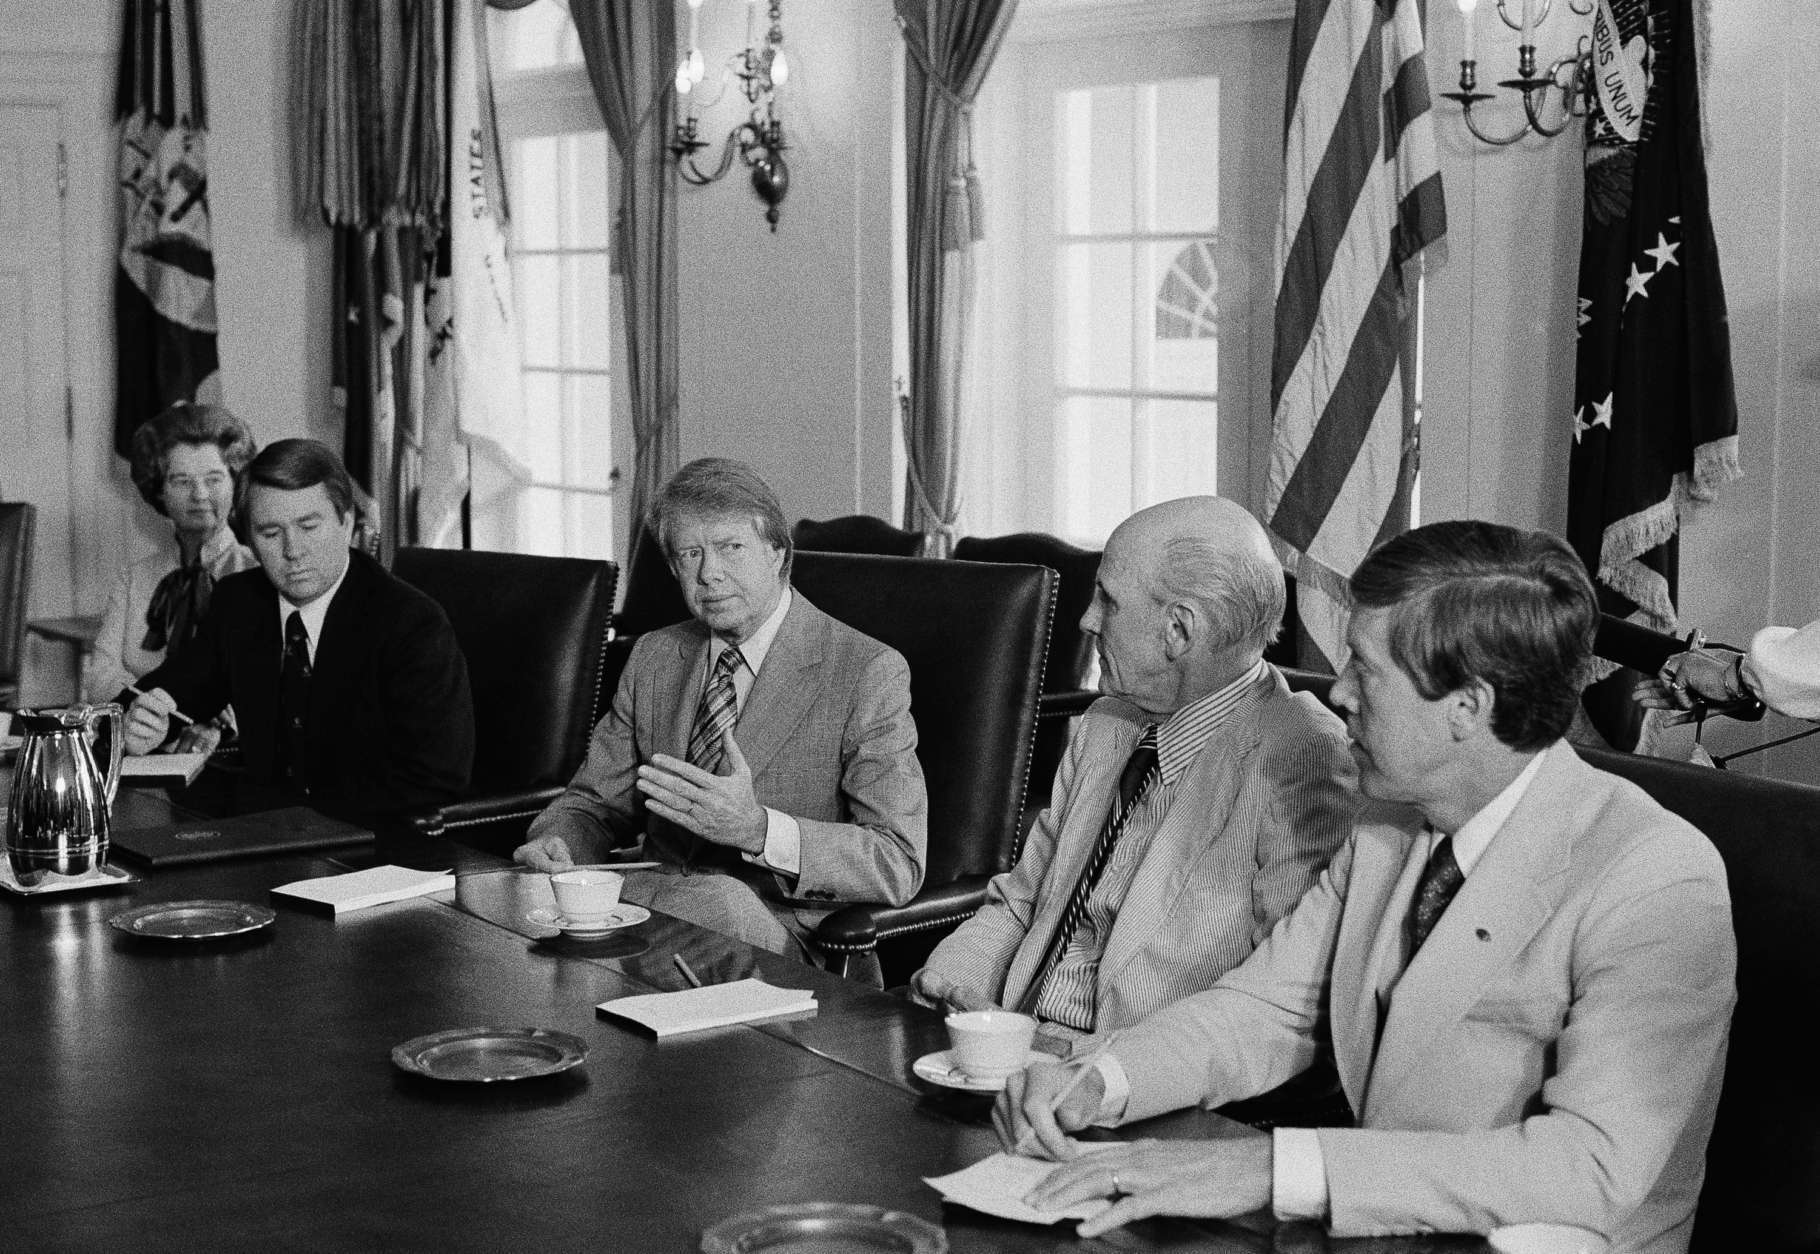 President Jimmy Carter meets with congressional supporters of the proposed B-1 bomber, June 7, 1977 in Washington.  From left are Rep. Marjorie Holt, (R-Md.), Rep. Wesley W. Watkins (D-Okla.), Carter, Sen. Alan Cranston (D-Calif.), and Rep. Jack Brinkley (D-Ga.).  (AP Photo/Harvey Georges)